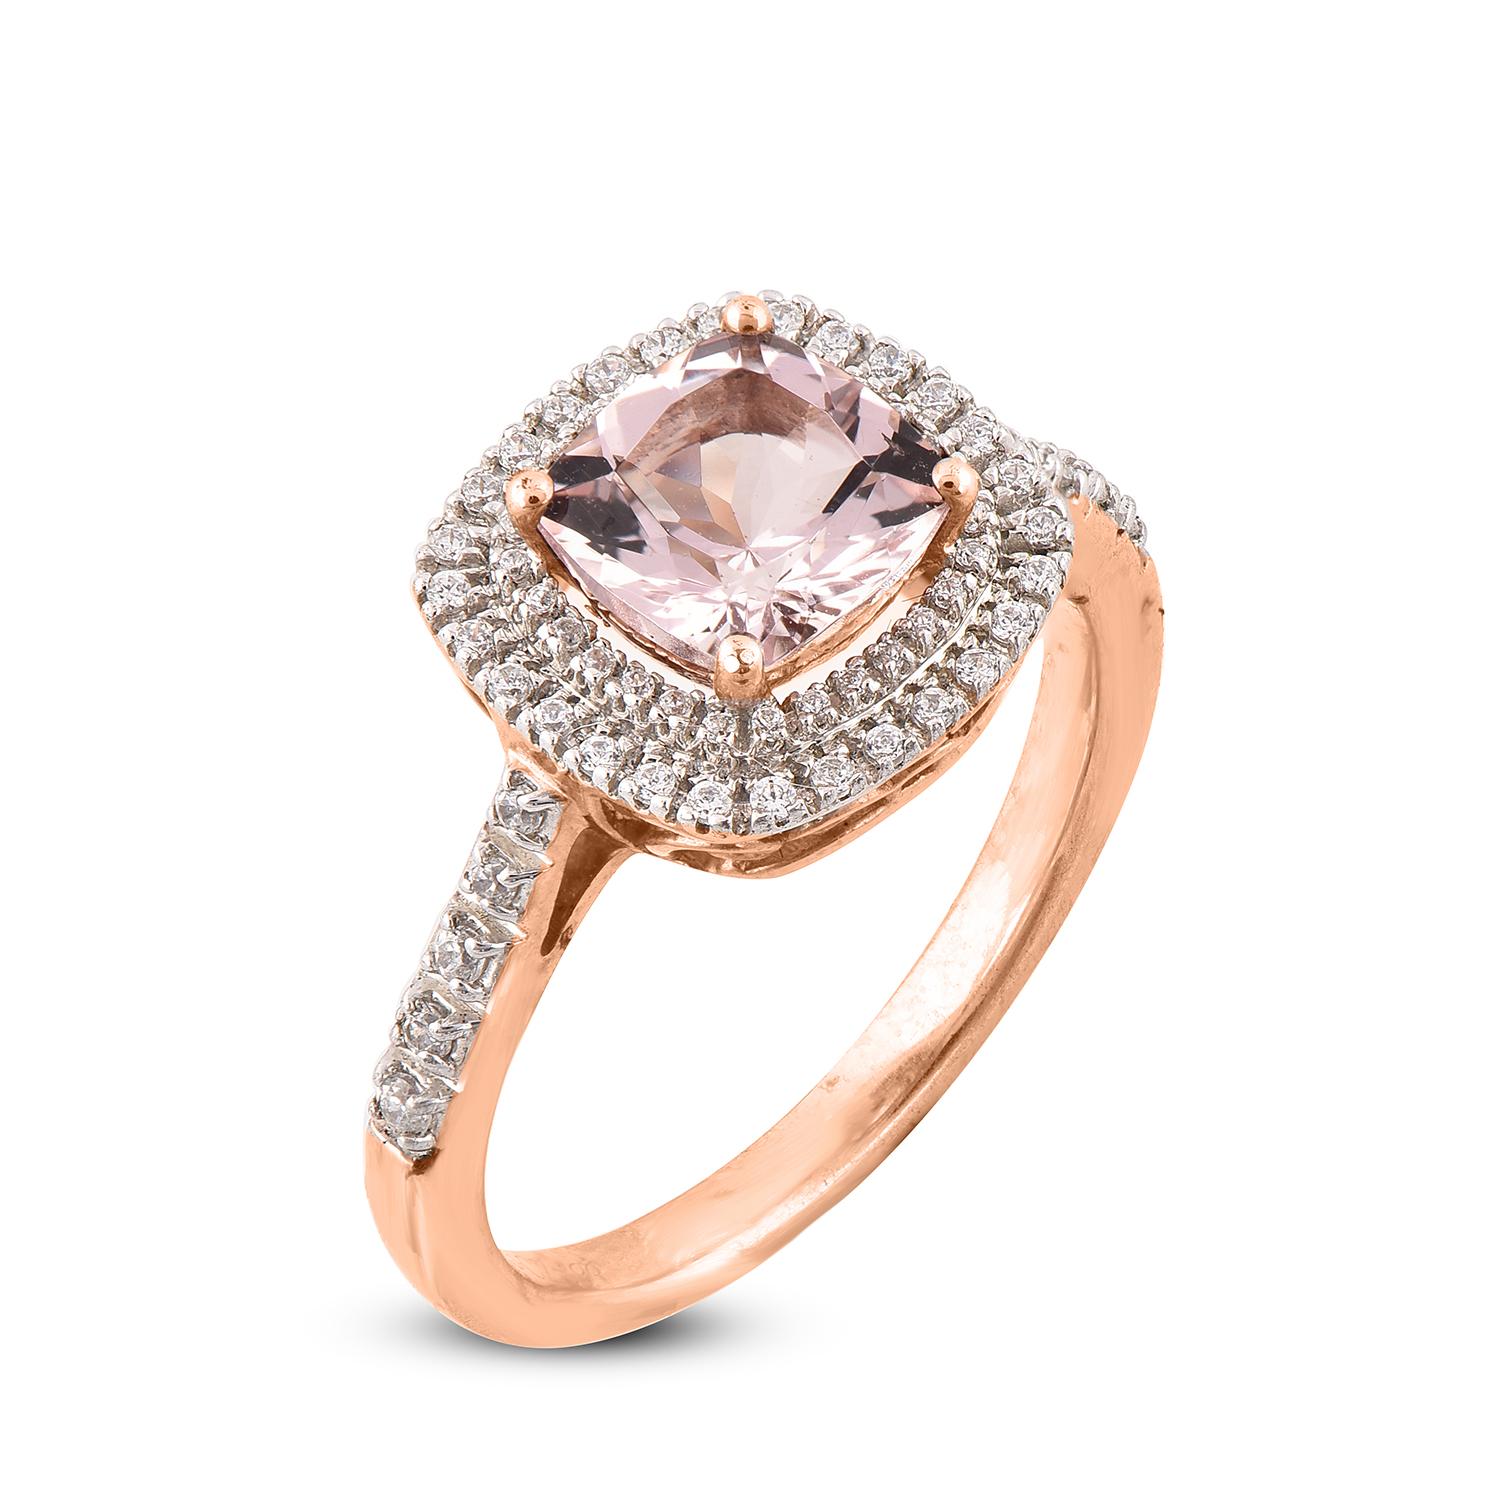 A bright pop of sparkle in a designer ring that will go well on any outfit. Embellished with 66 round and 1 Cushion shape morganite set in prong setting and crafted by our in-house experts in 14 karat rose gold. Diamonds are graded H-I Color, I2